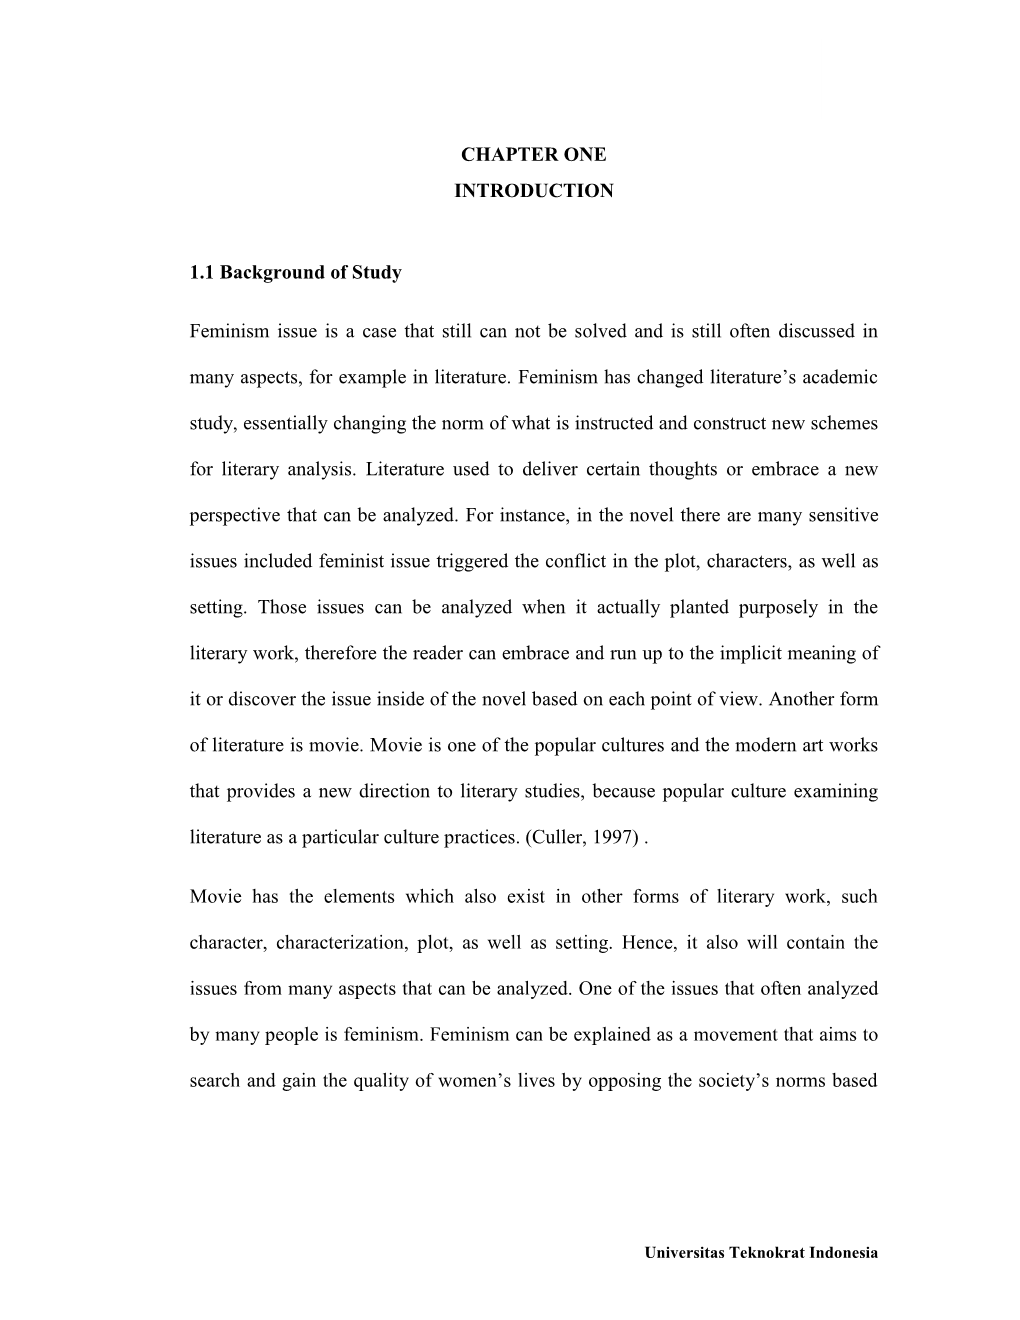 CHAPTER ONE INTRODUCTION 1.1 Background of Study Feminism